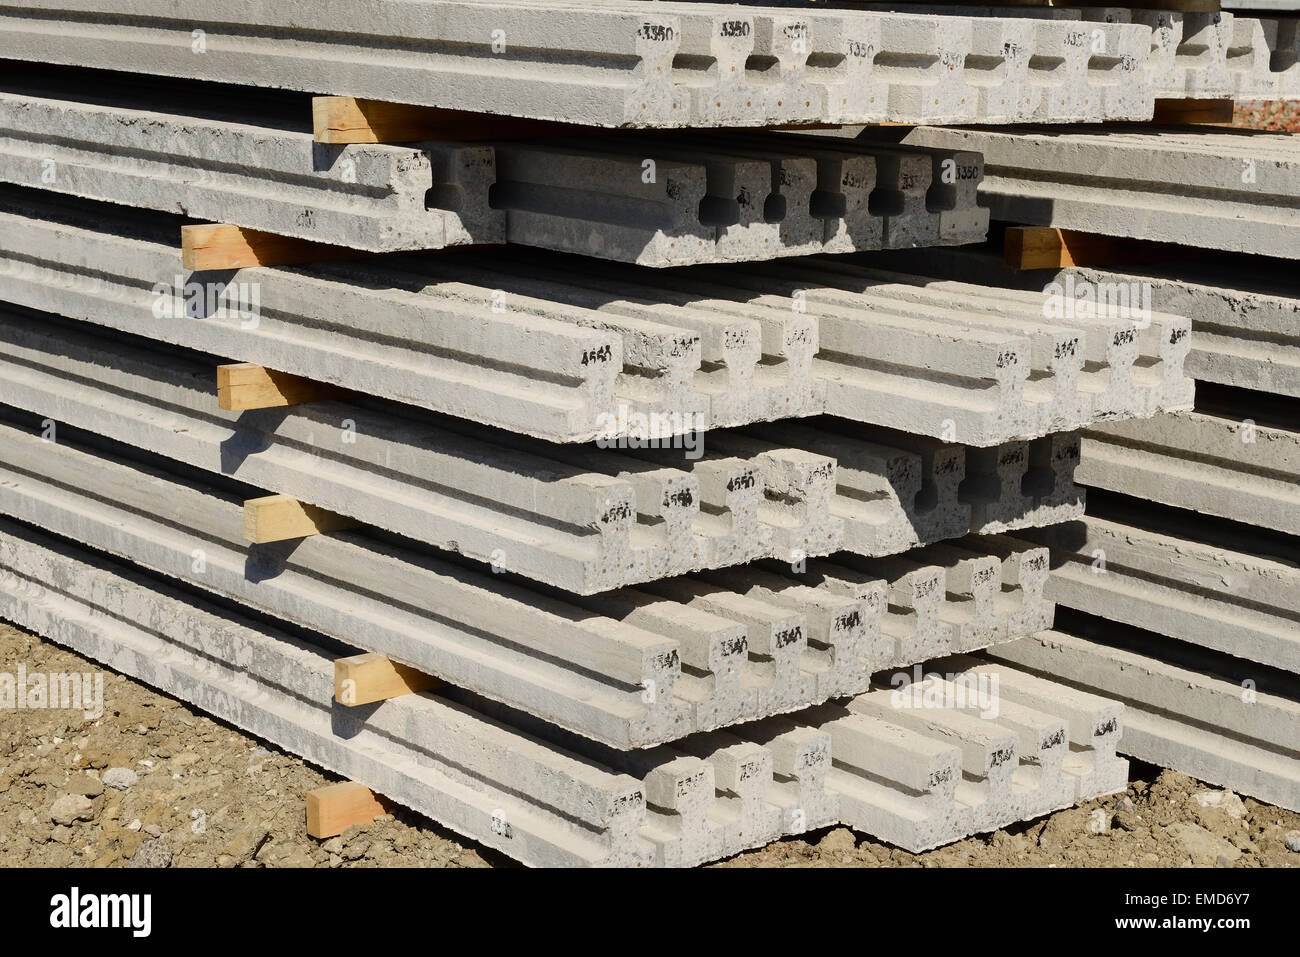 Reinforced concrete beams for a beam and block floor on a UK construction site Stock Photo